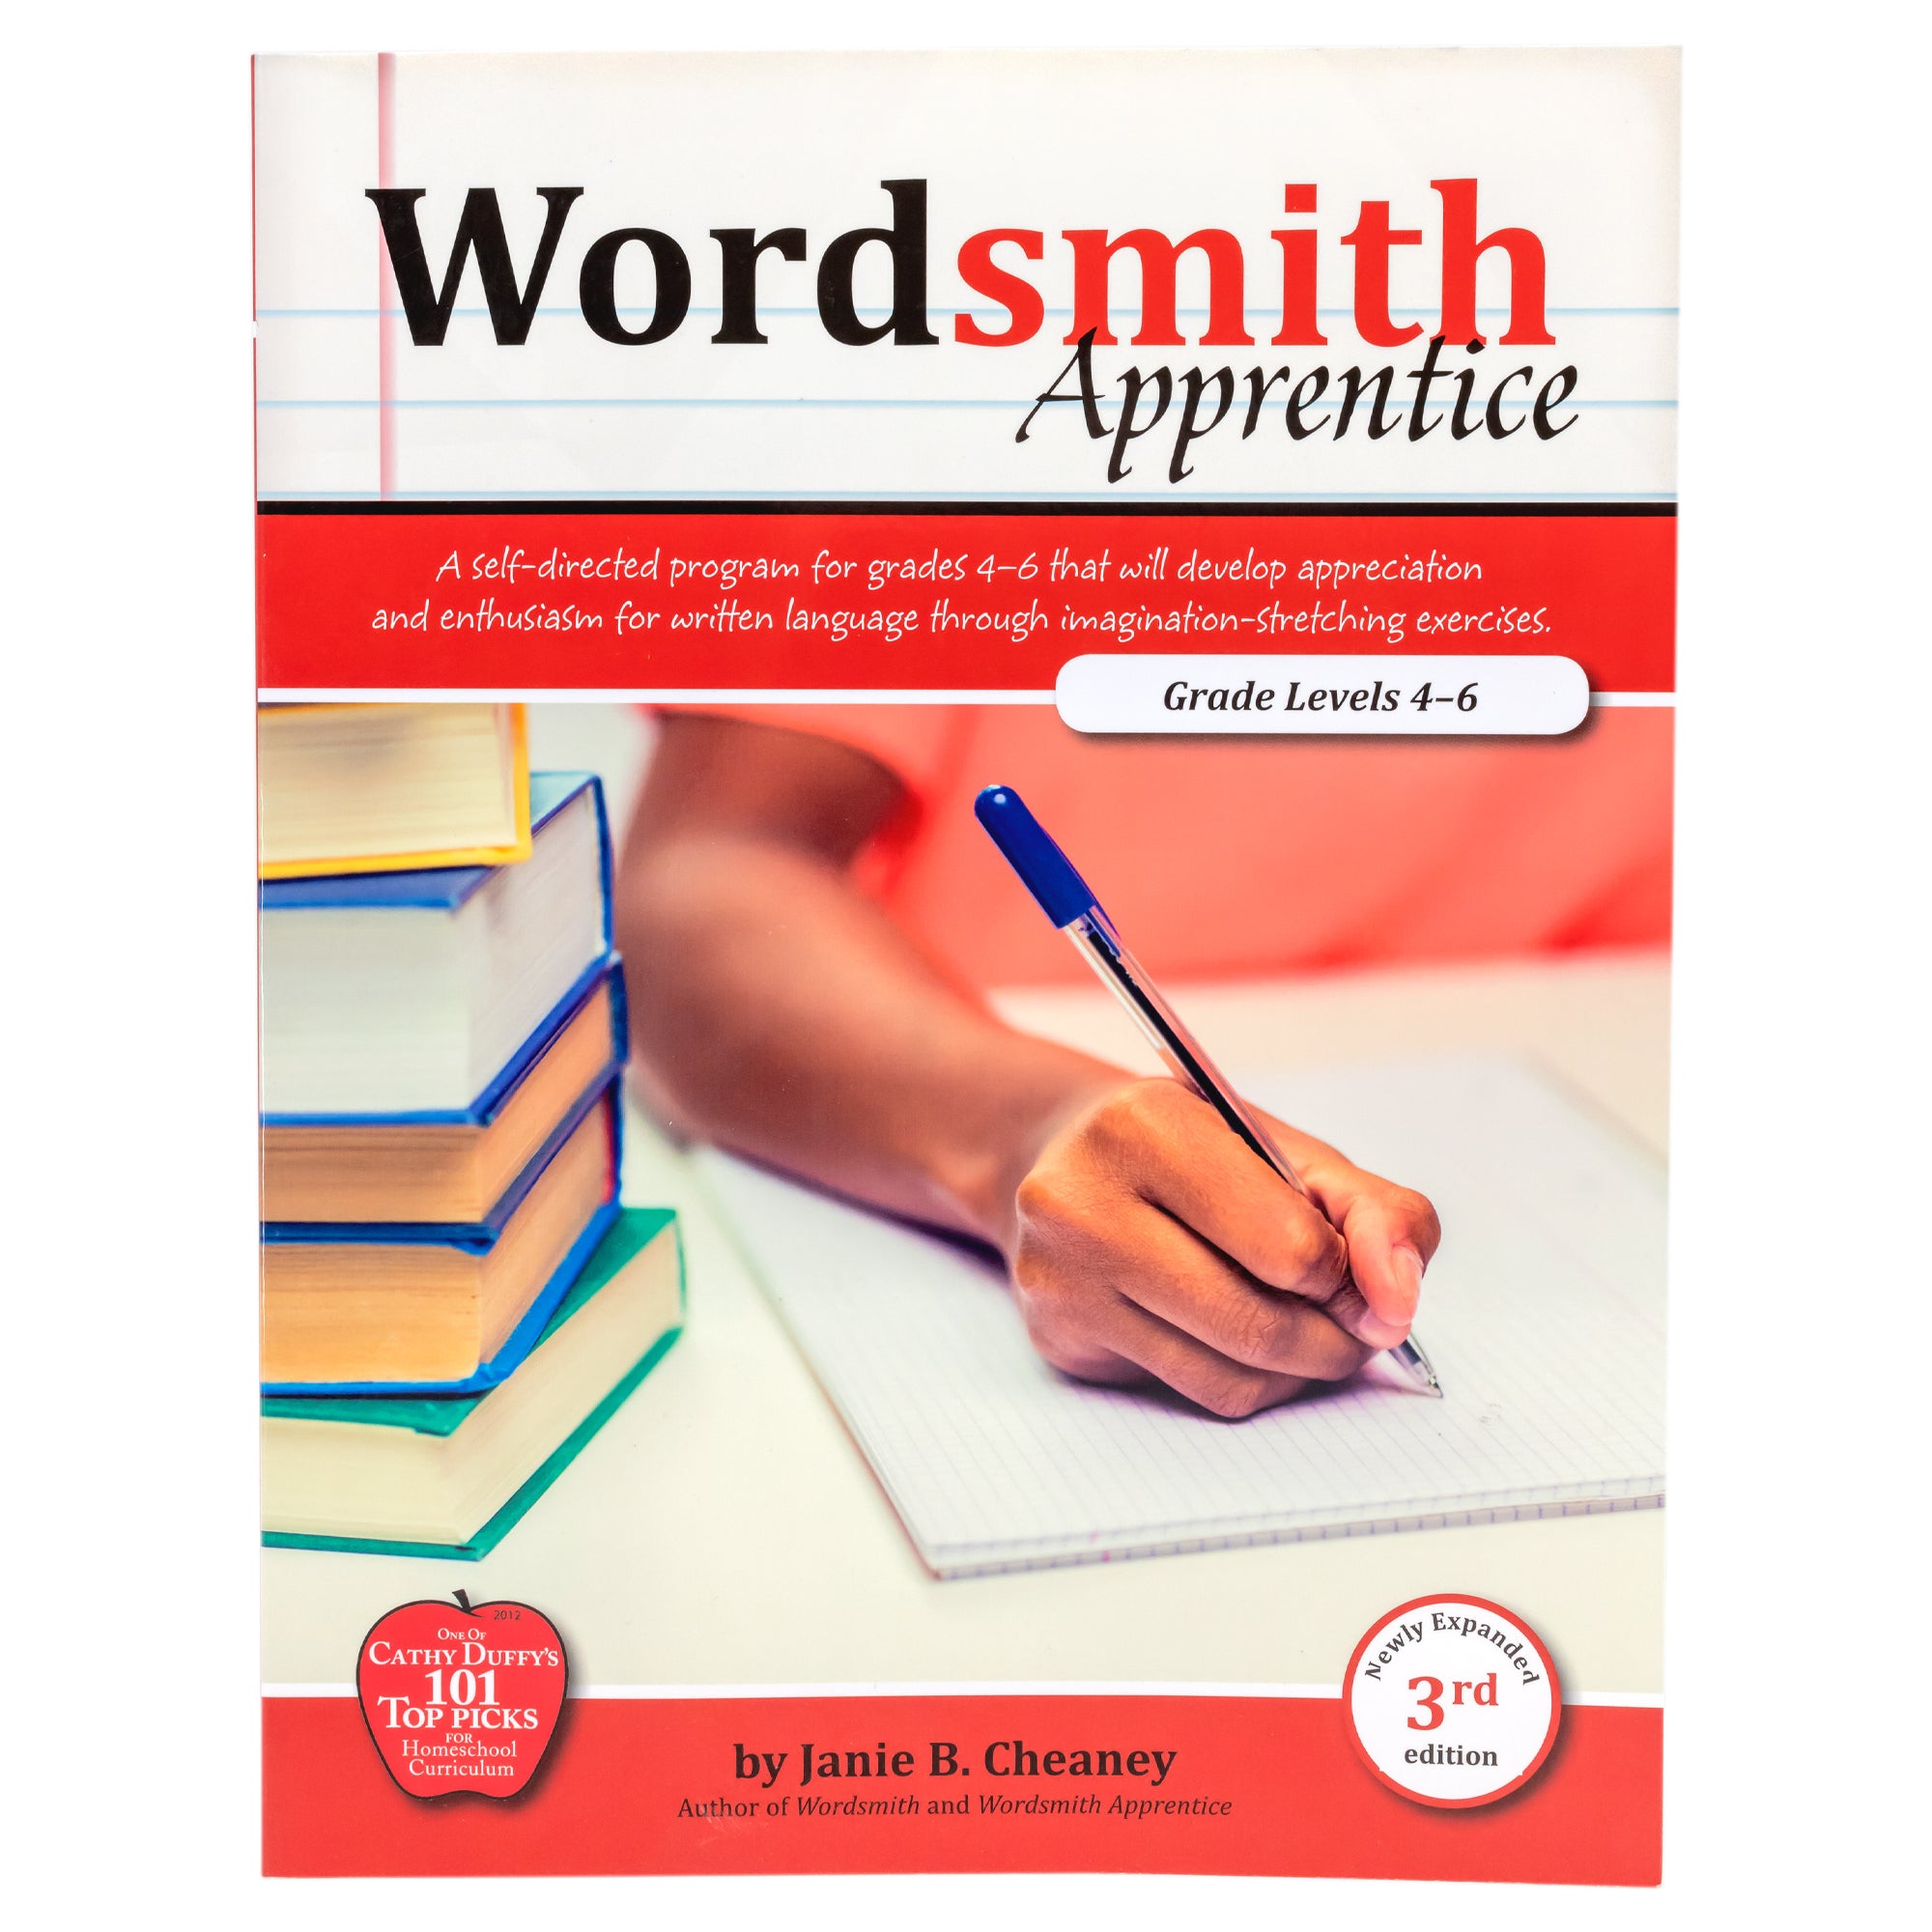 Wordsmith Apprentice book cover. The background shows a notebook page at the top with the title over the top. Under that are 2 red stripes. Between the stripes is a picture of a child writing in a notebook with a pen. To the left of the child, there is a stack of books.